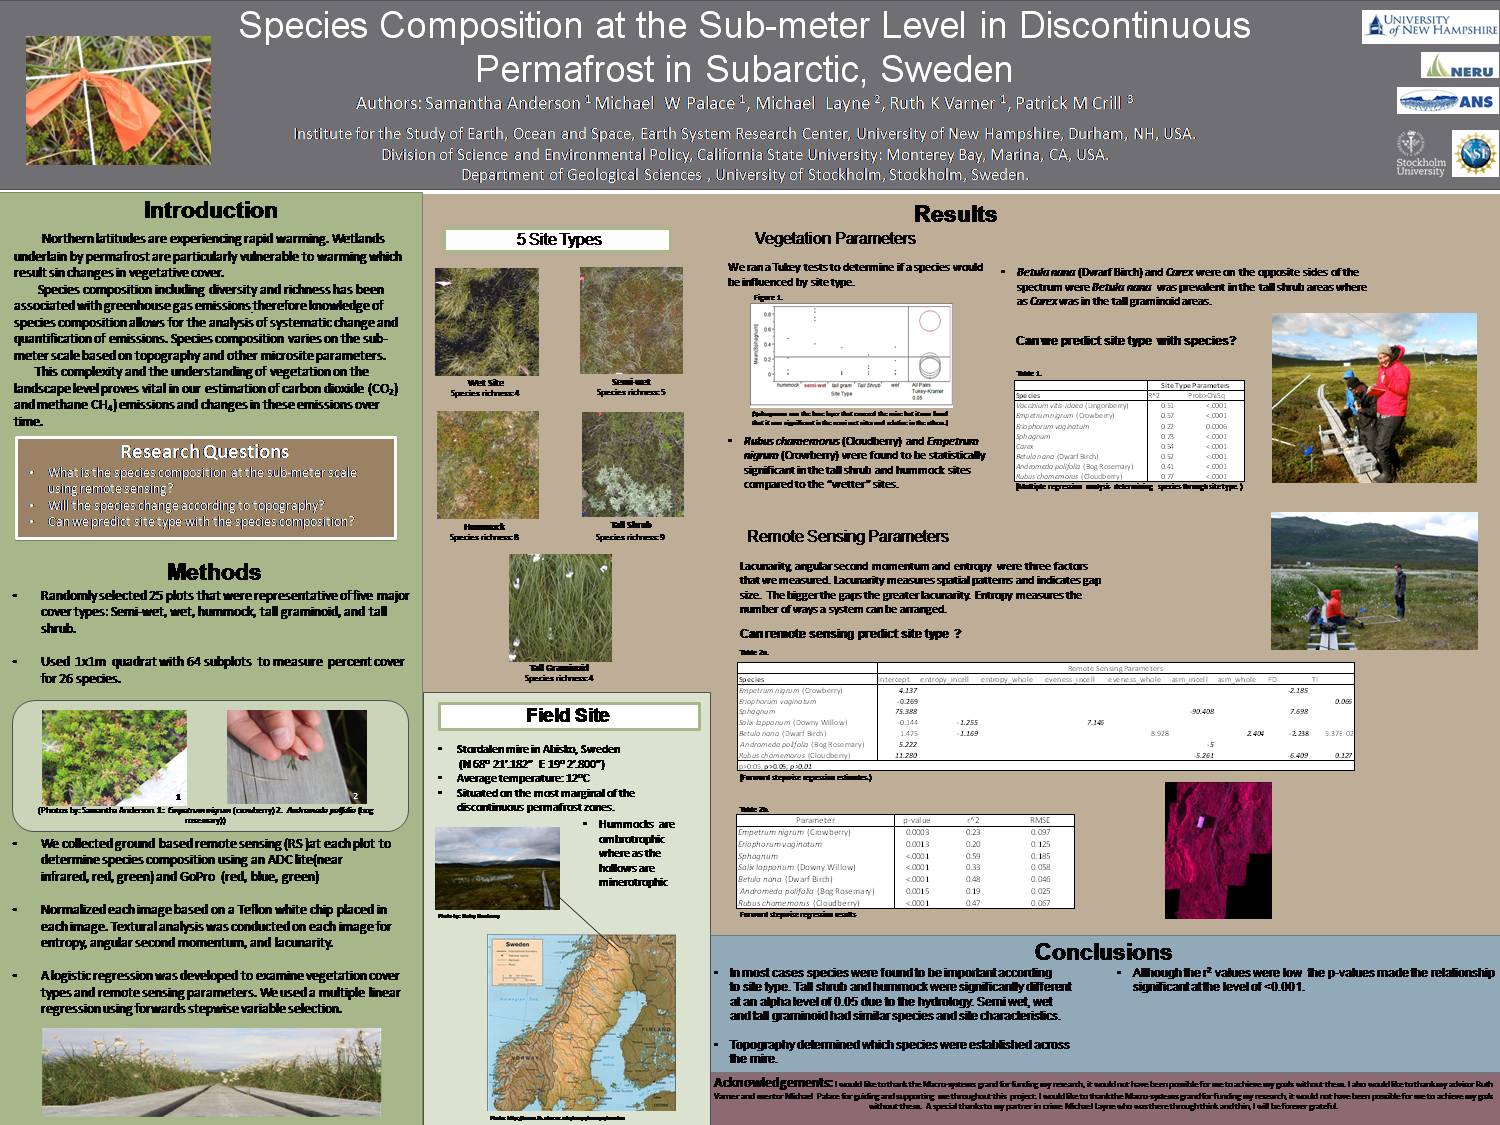 Species Composition At The Sub-Meter Level In Discontinous Permafrost In Subartic Sweden by sms222